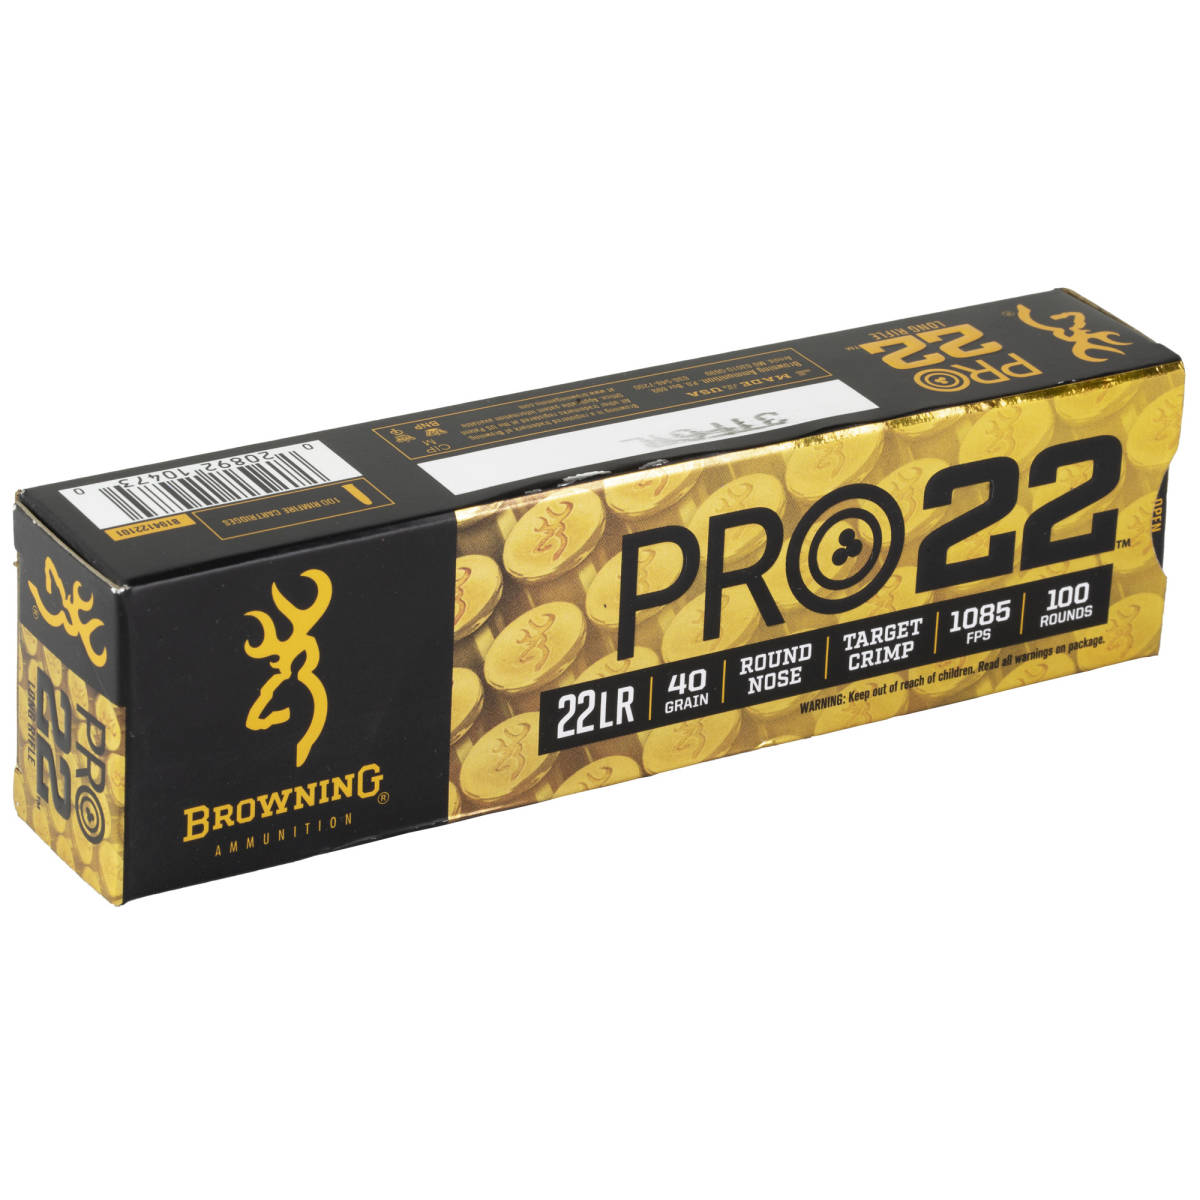 Browning Ammo B194122101 Pro22 22 LR 40 gr Lead Round Nose 100 Per Box/...-img-1